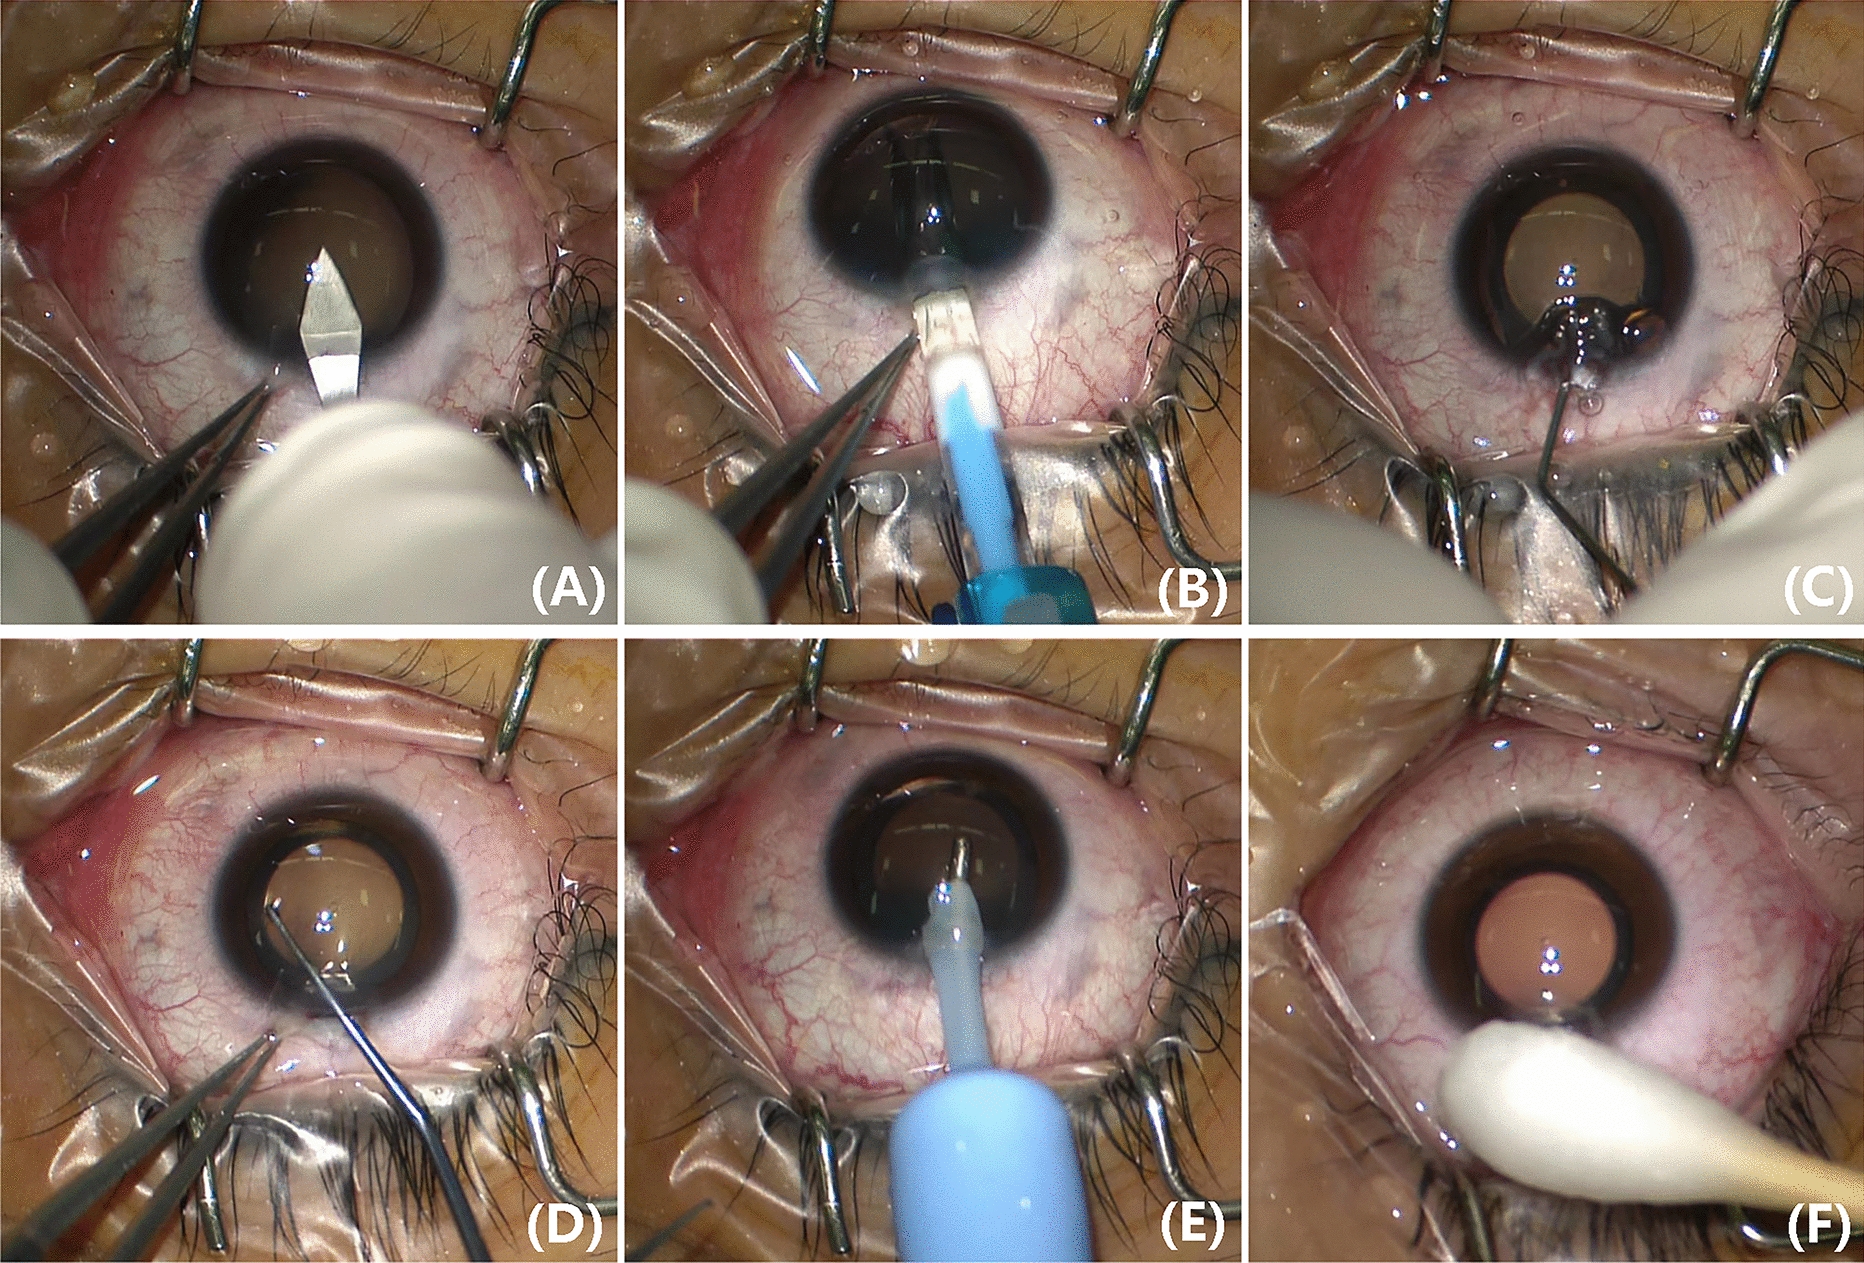 The effect of irrigation and aspiration on the corneal endothelial cell density in patients undergoing Implantable Collamer Lens with a central hole implantation for myopia correction